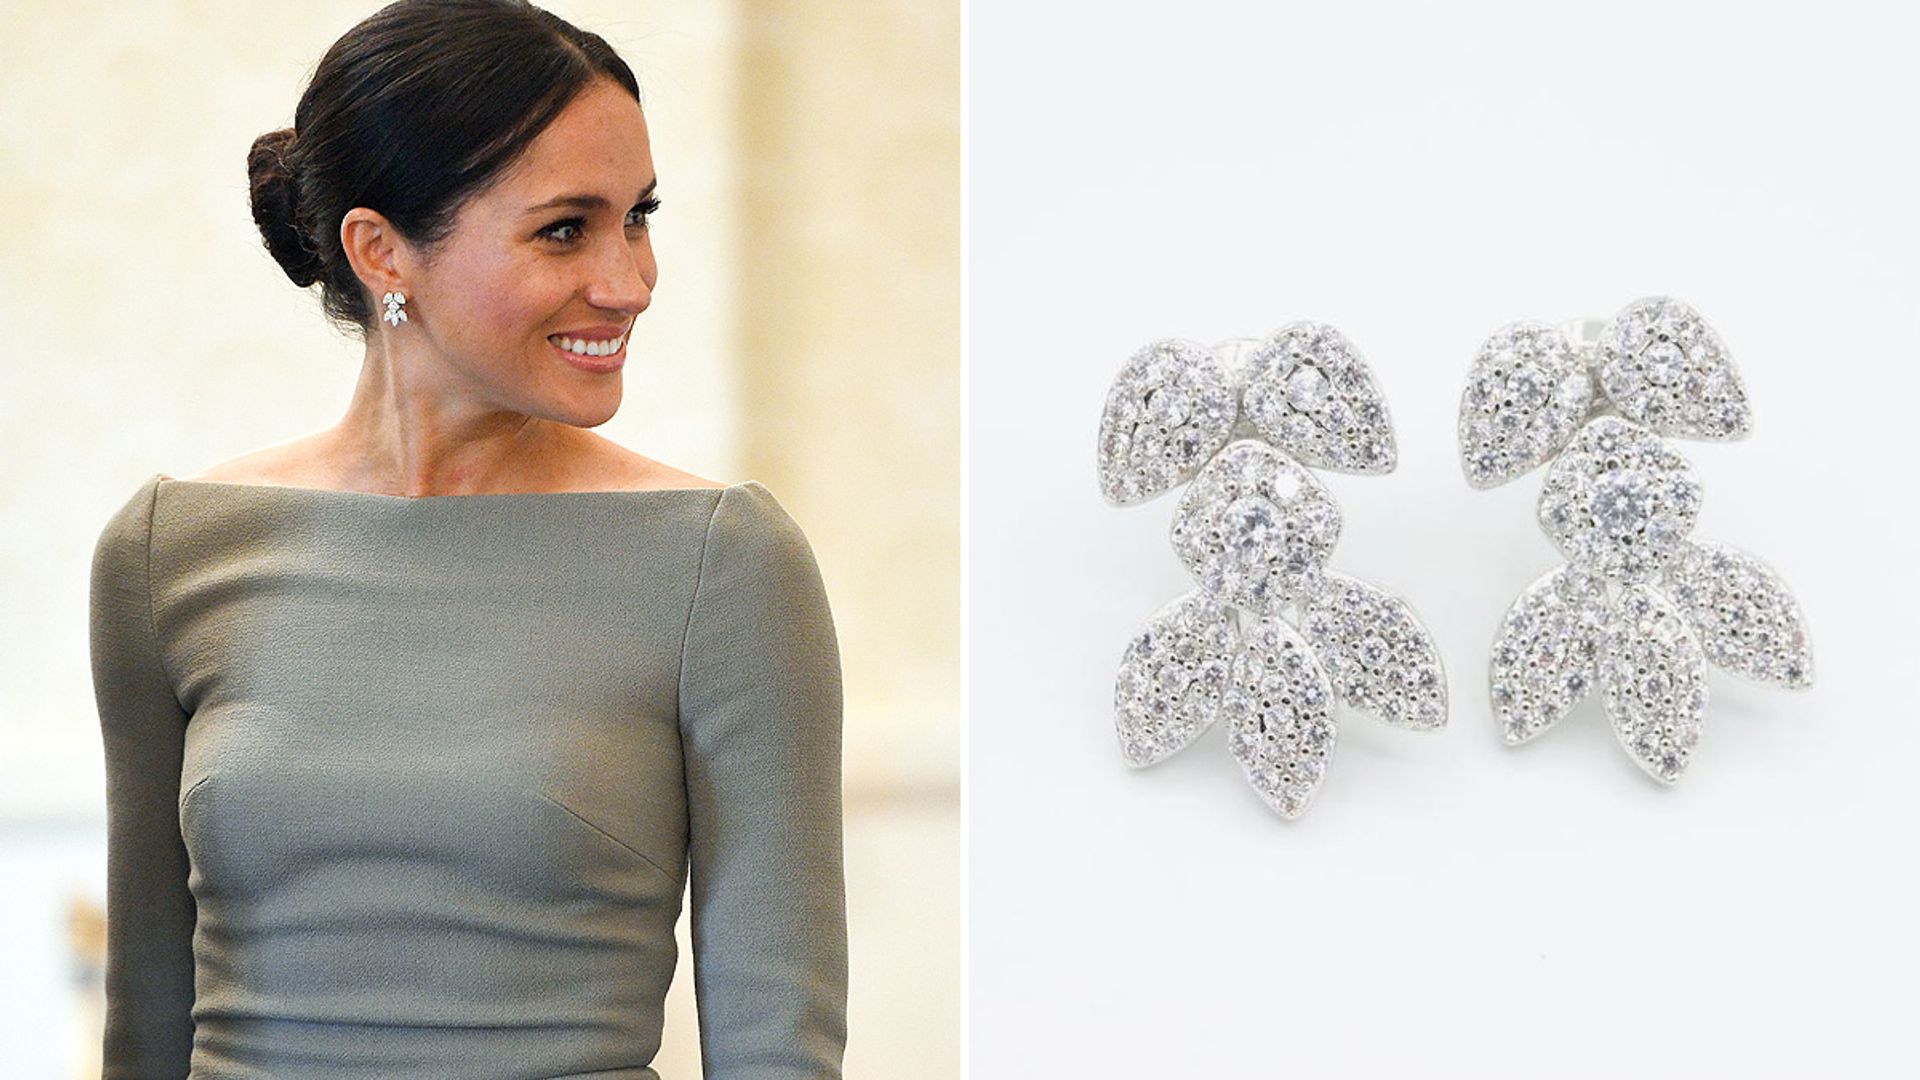 Hurry! The Meghan Markle-inspired snowstorm earrings are back in stock on Etsy